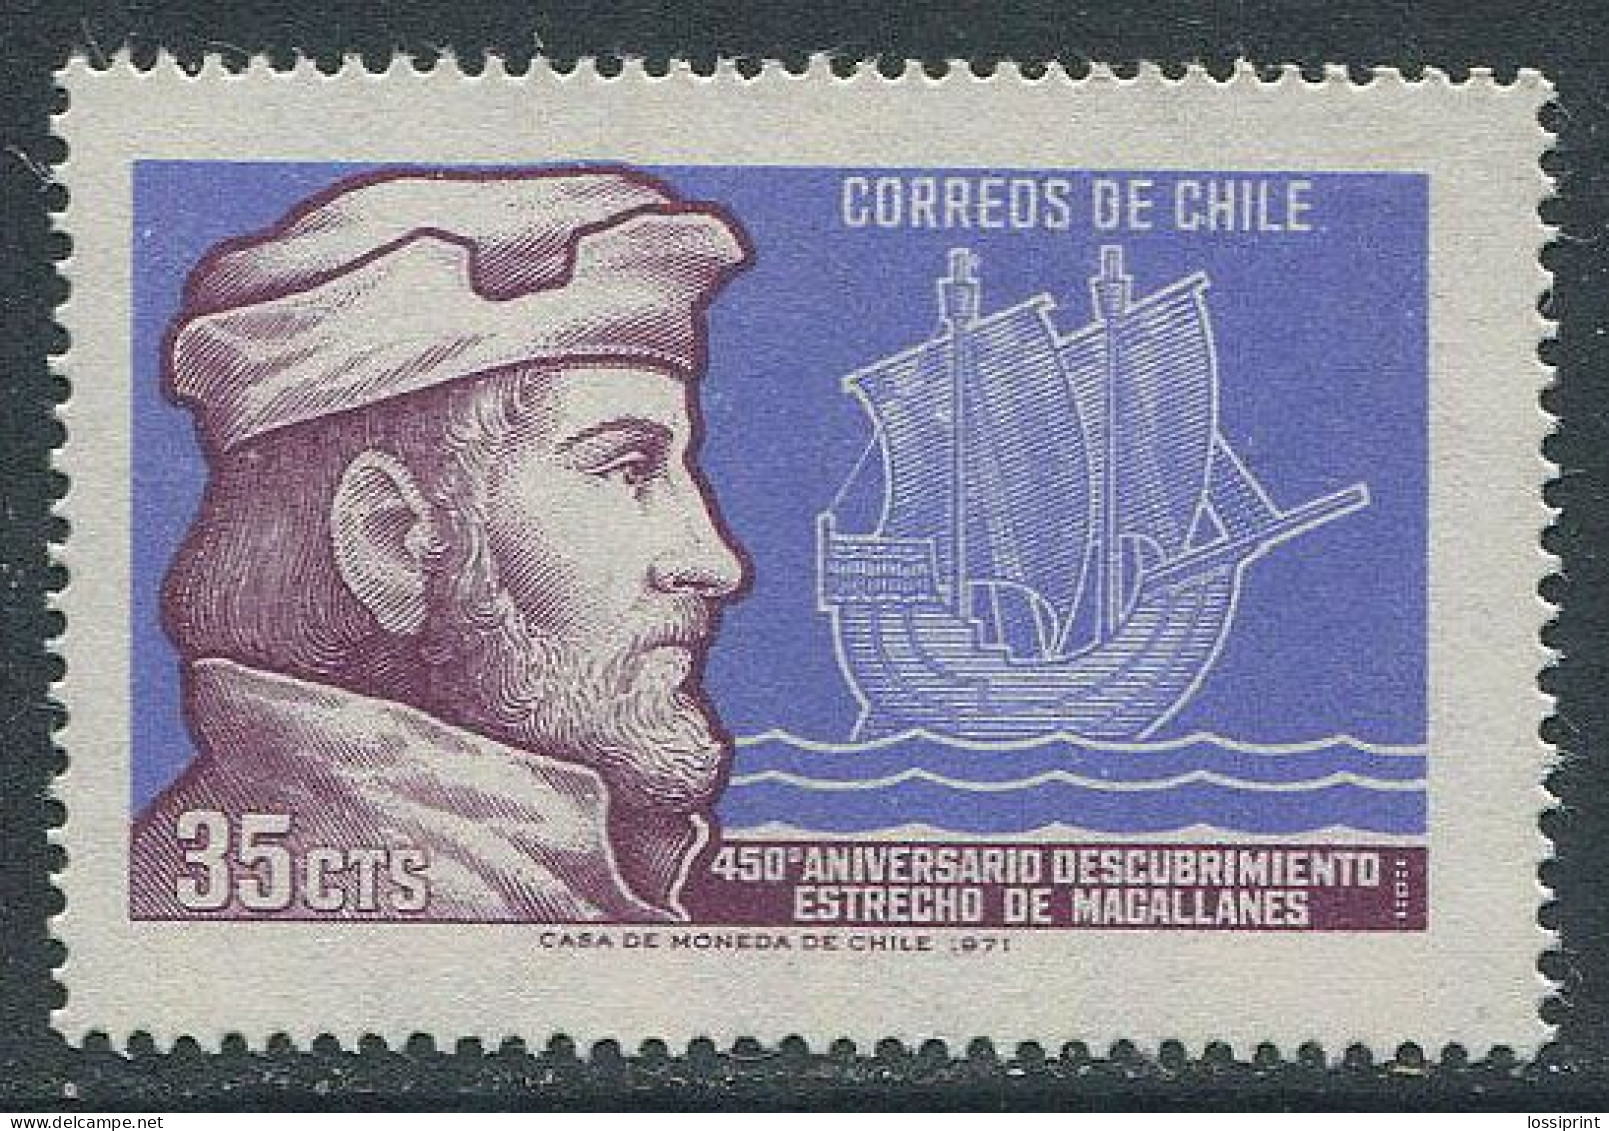 Chile:Unused Stamp 450 Years From Magalhaes Exhibition, Sailing Ship, Old Ship, 1971, MNH - Bateaux